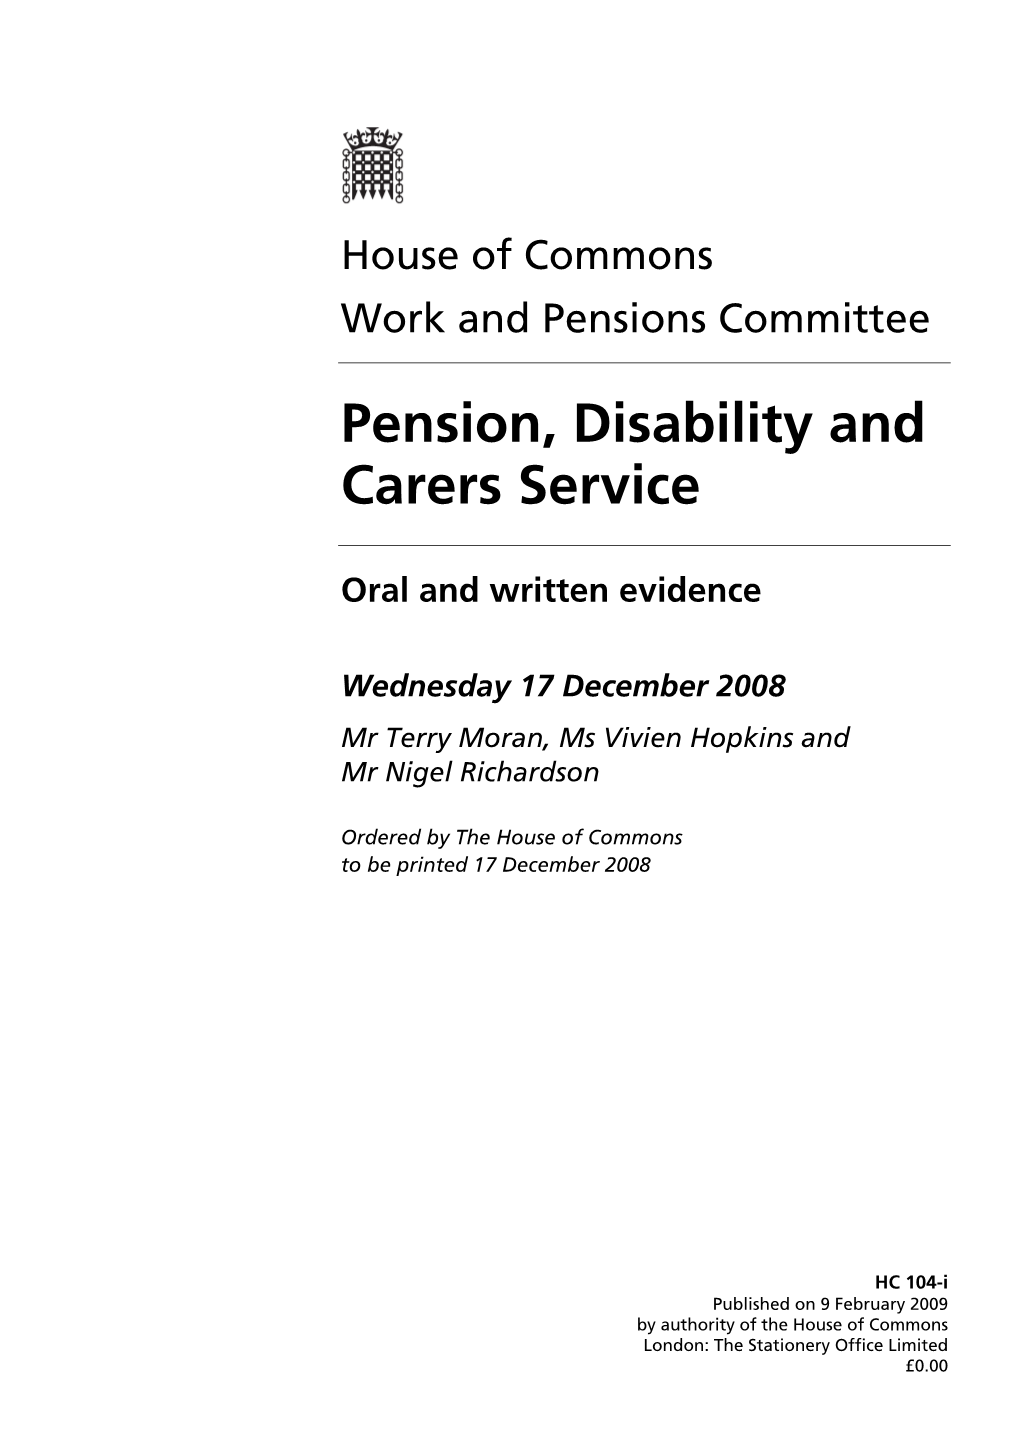 Pension, Disability and Carers Service